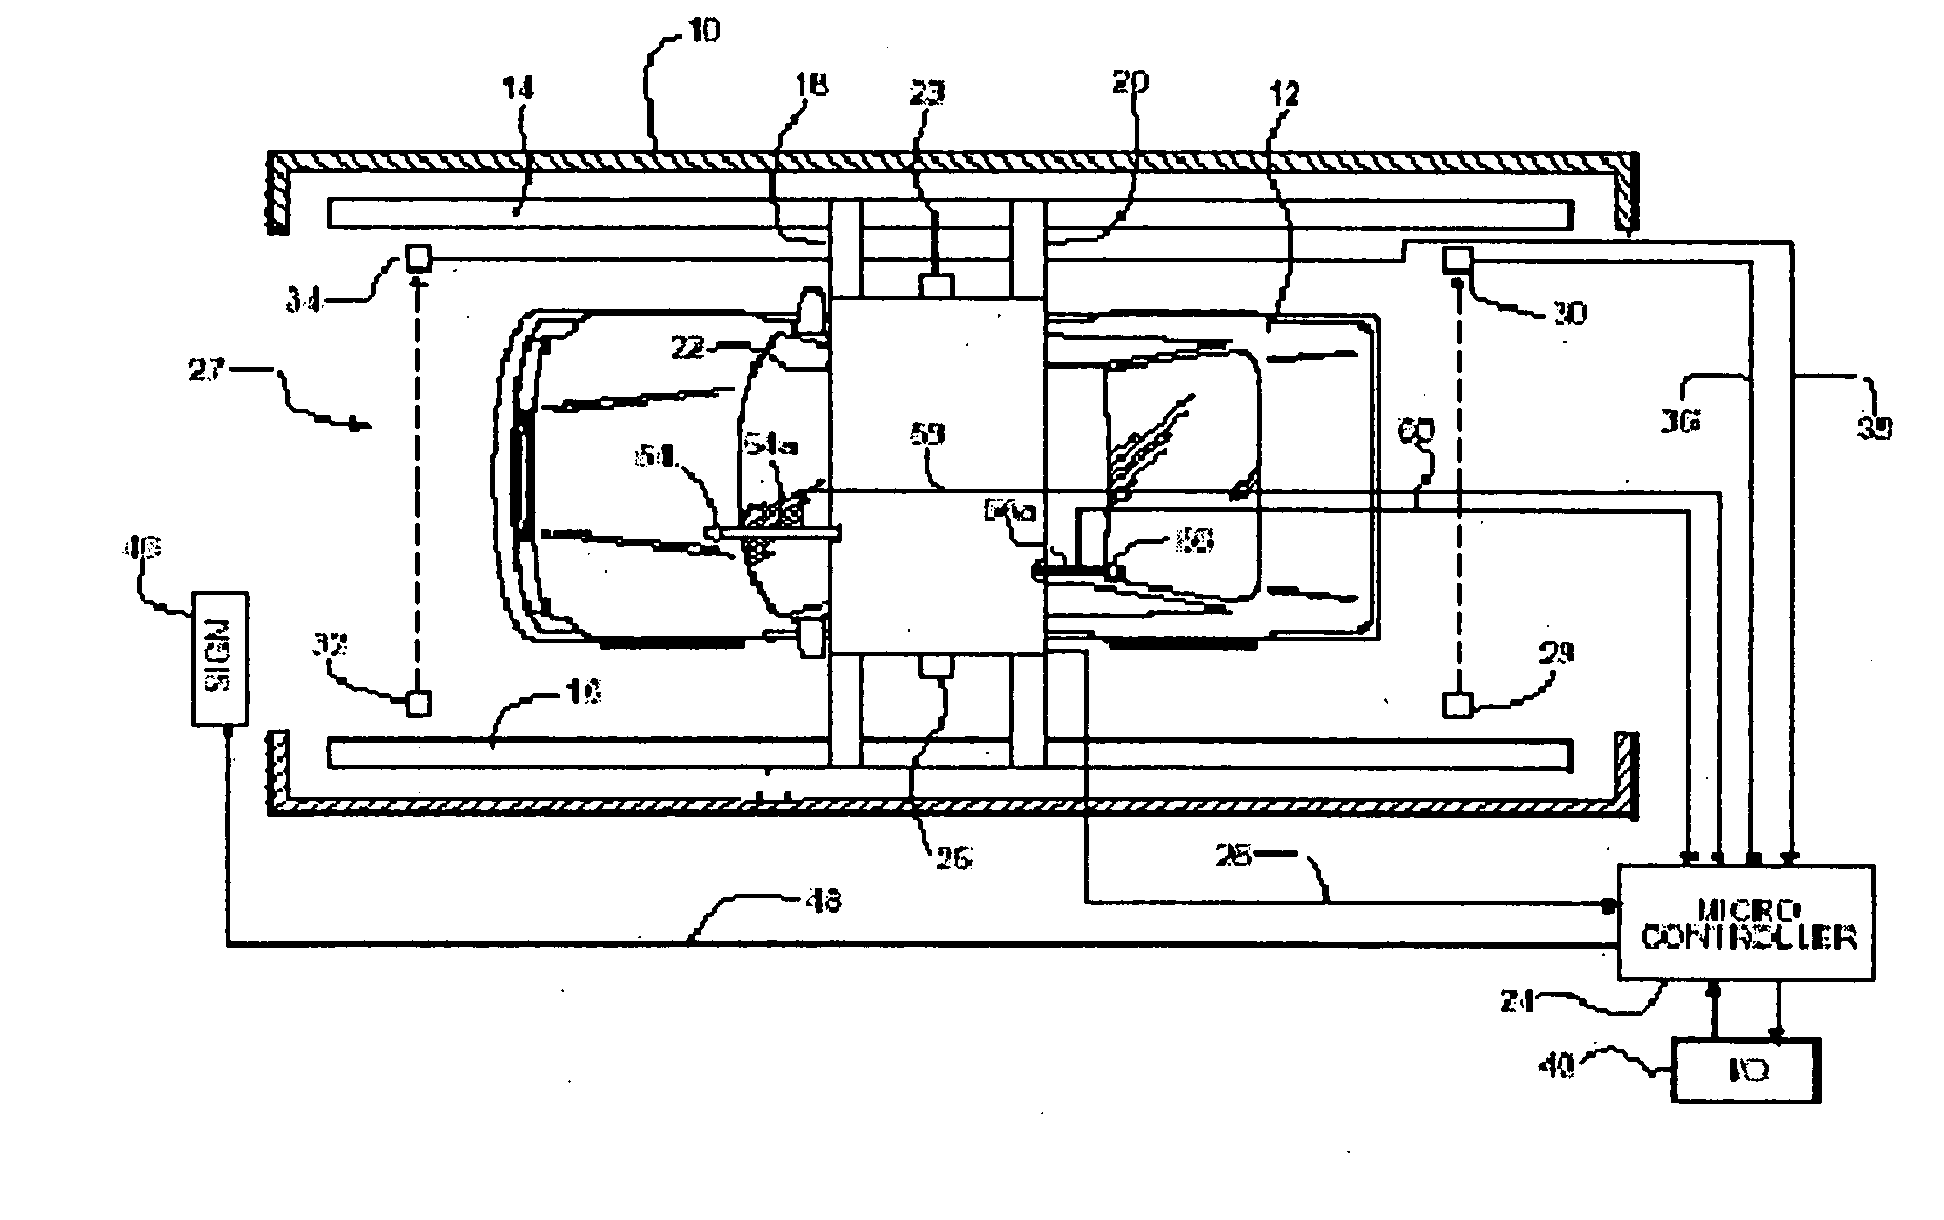 Method and apparatus for washing cars